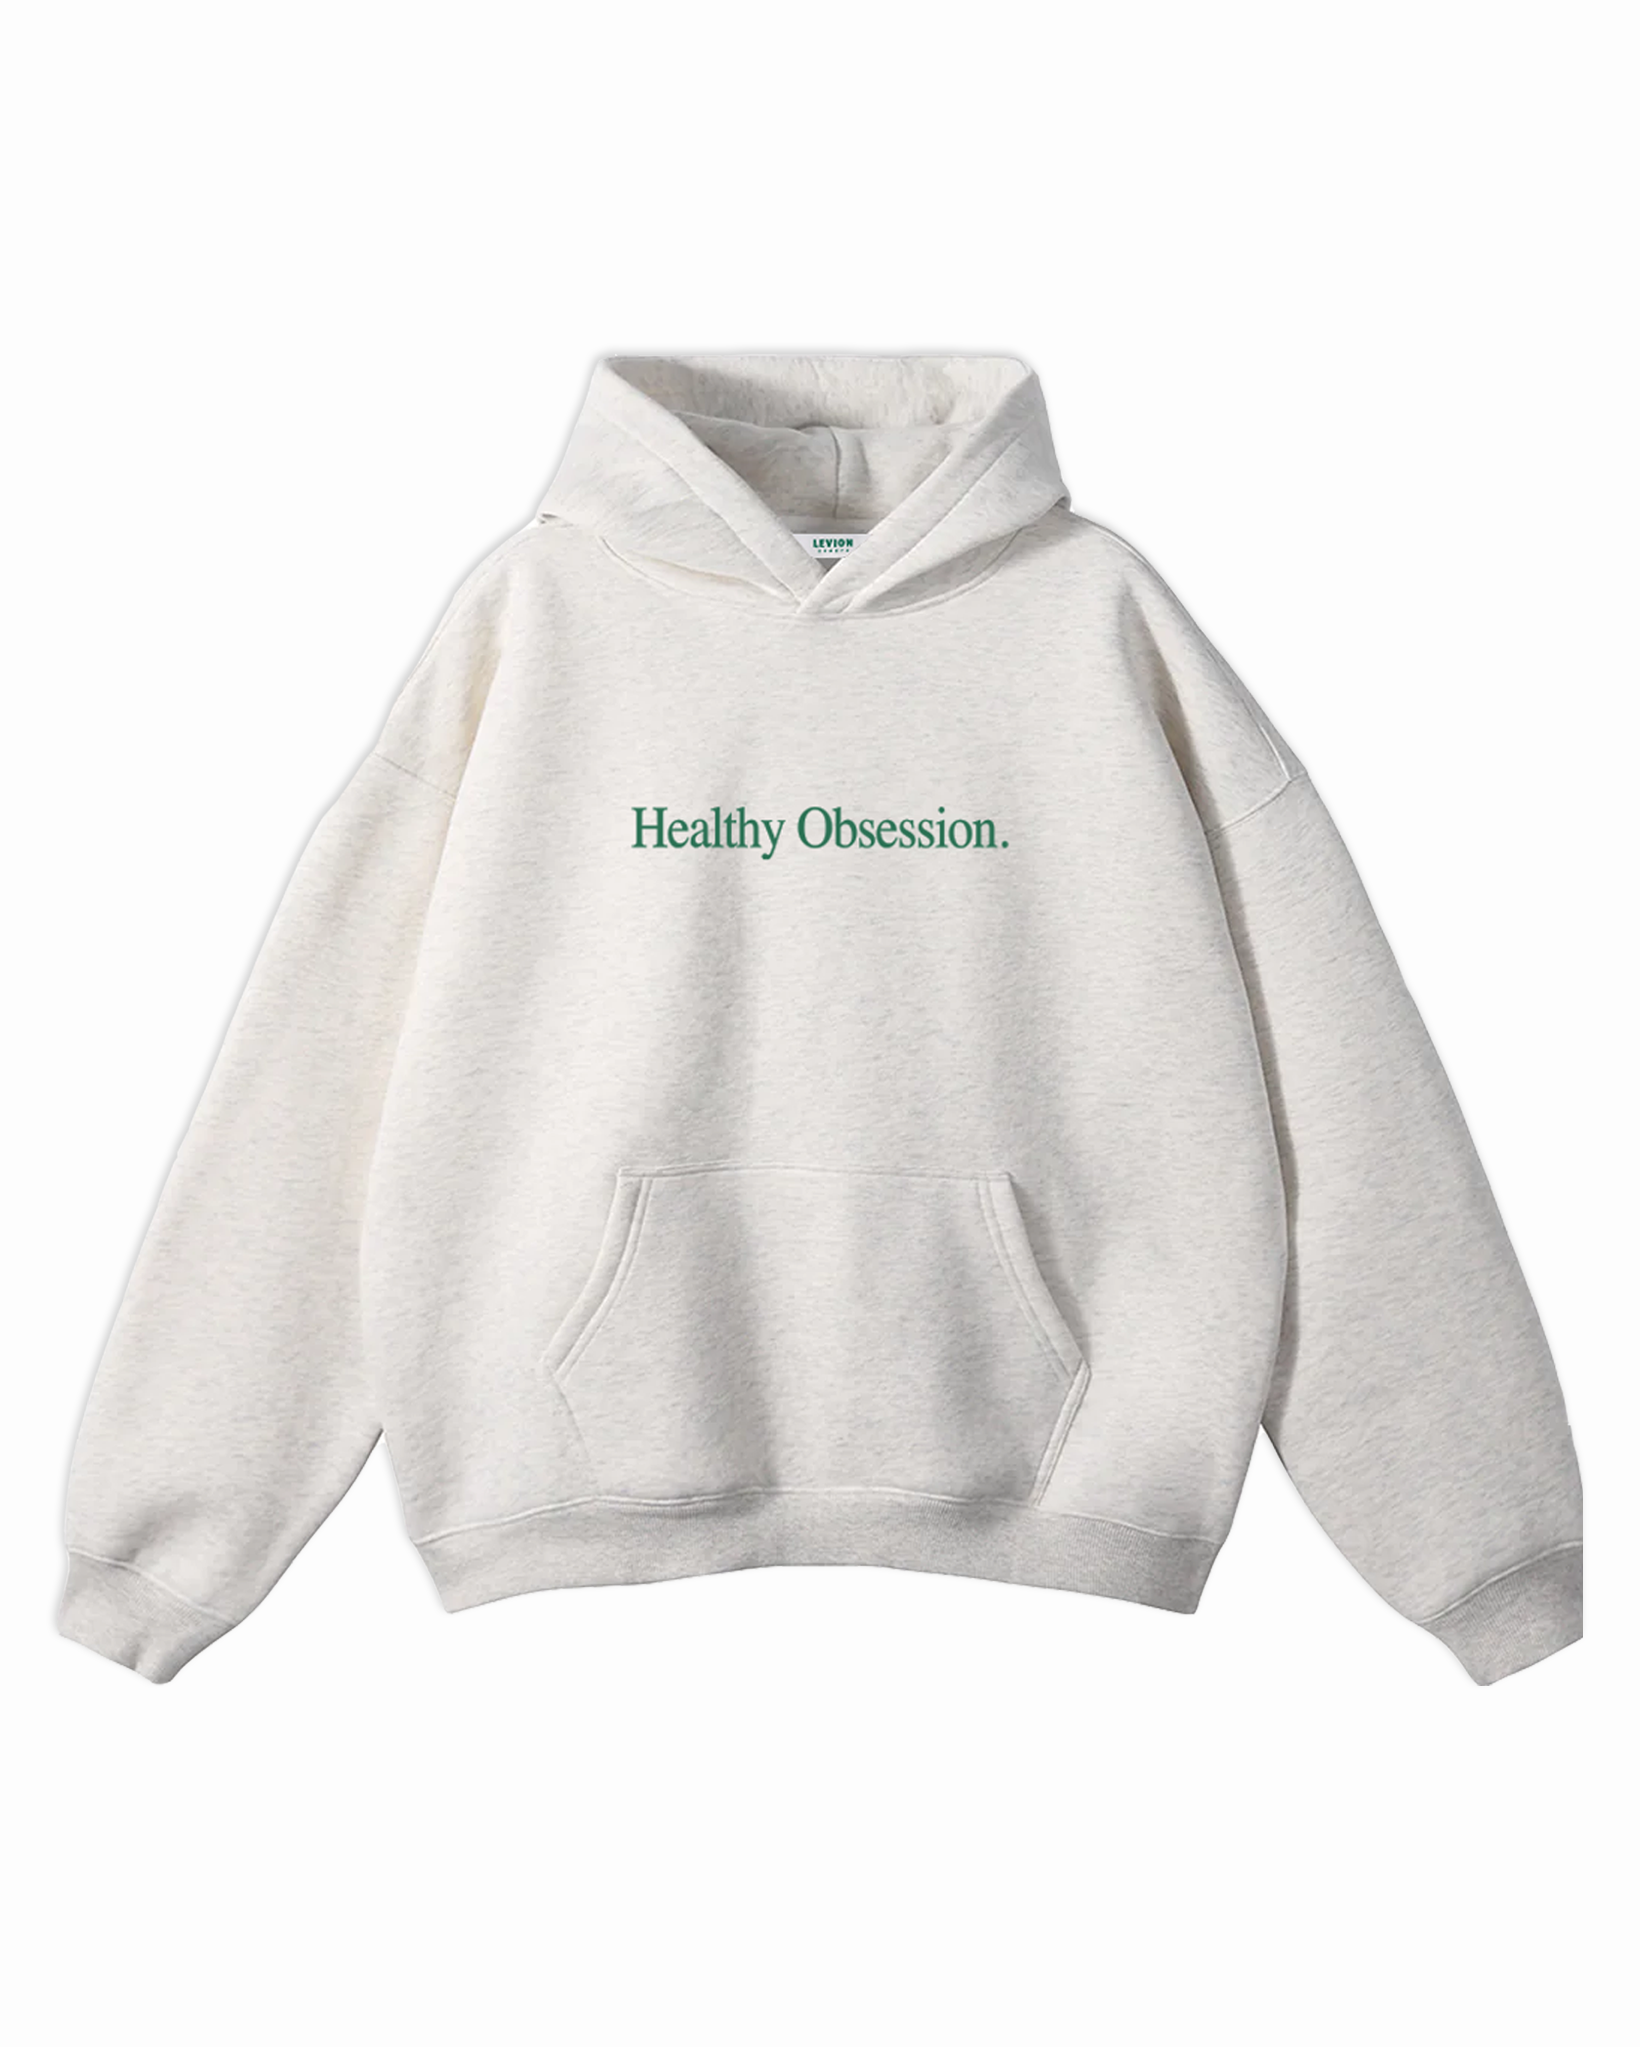 Healthy Obsession Hoodie Light Grey